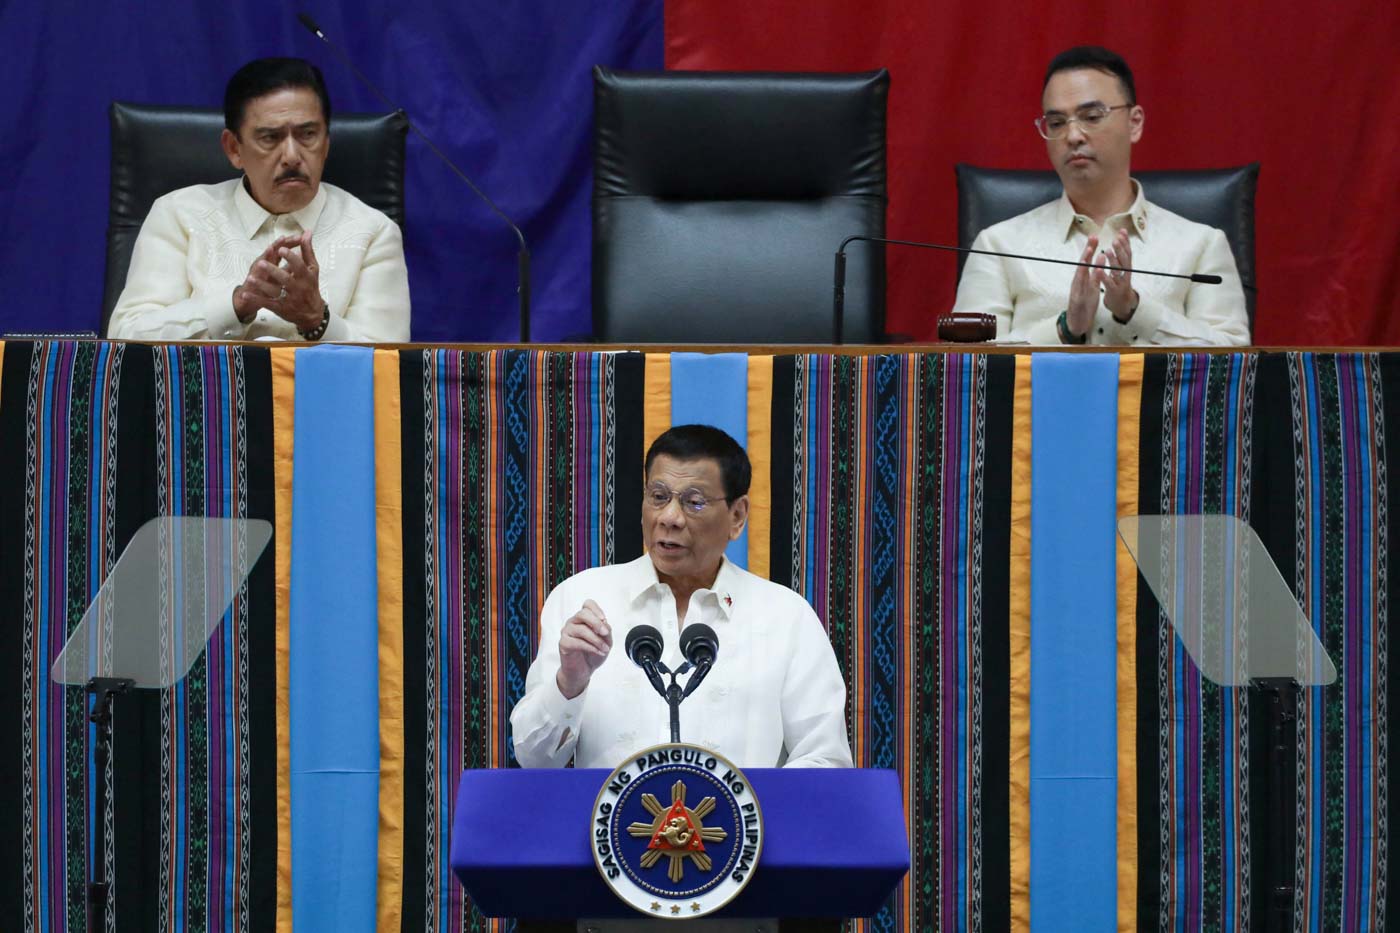 TOP PHILIPPINE LEADERS. President Rodrigo Duterte delivers his 4th State of the Nation Address on July 22, 2019. Behind him are 2 of the 3 officials in the presidential line of succcession: Senate President Vicente Sotto III and Speaker Alan Cayetano. Photo by Simeon Celi Jr/Presidential Photo  